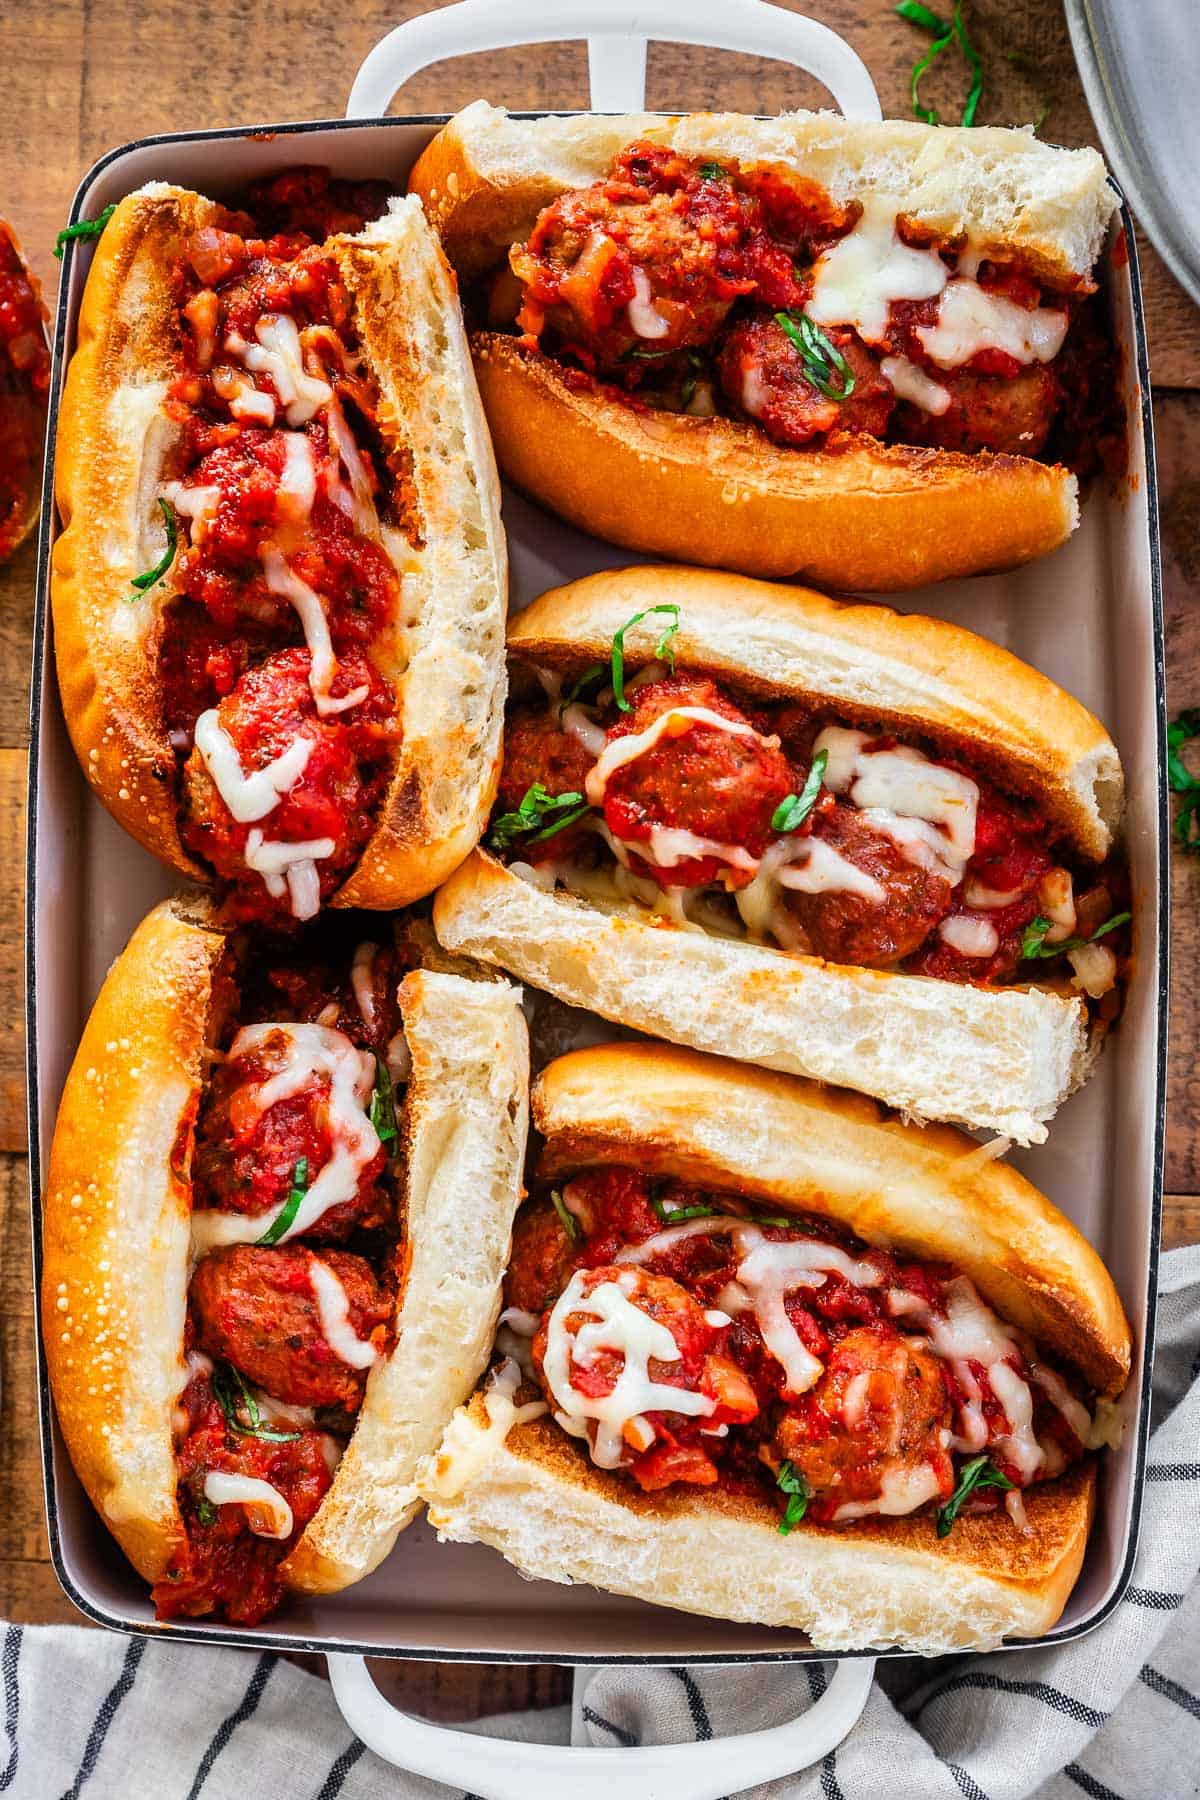 toasted hoagies stuffed with meatballs and sauce and covered in cheese in a baking dish.